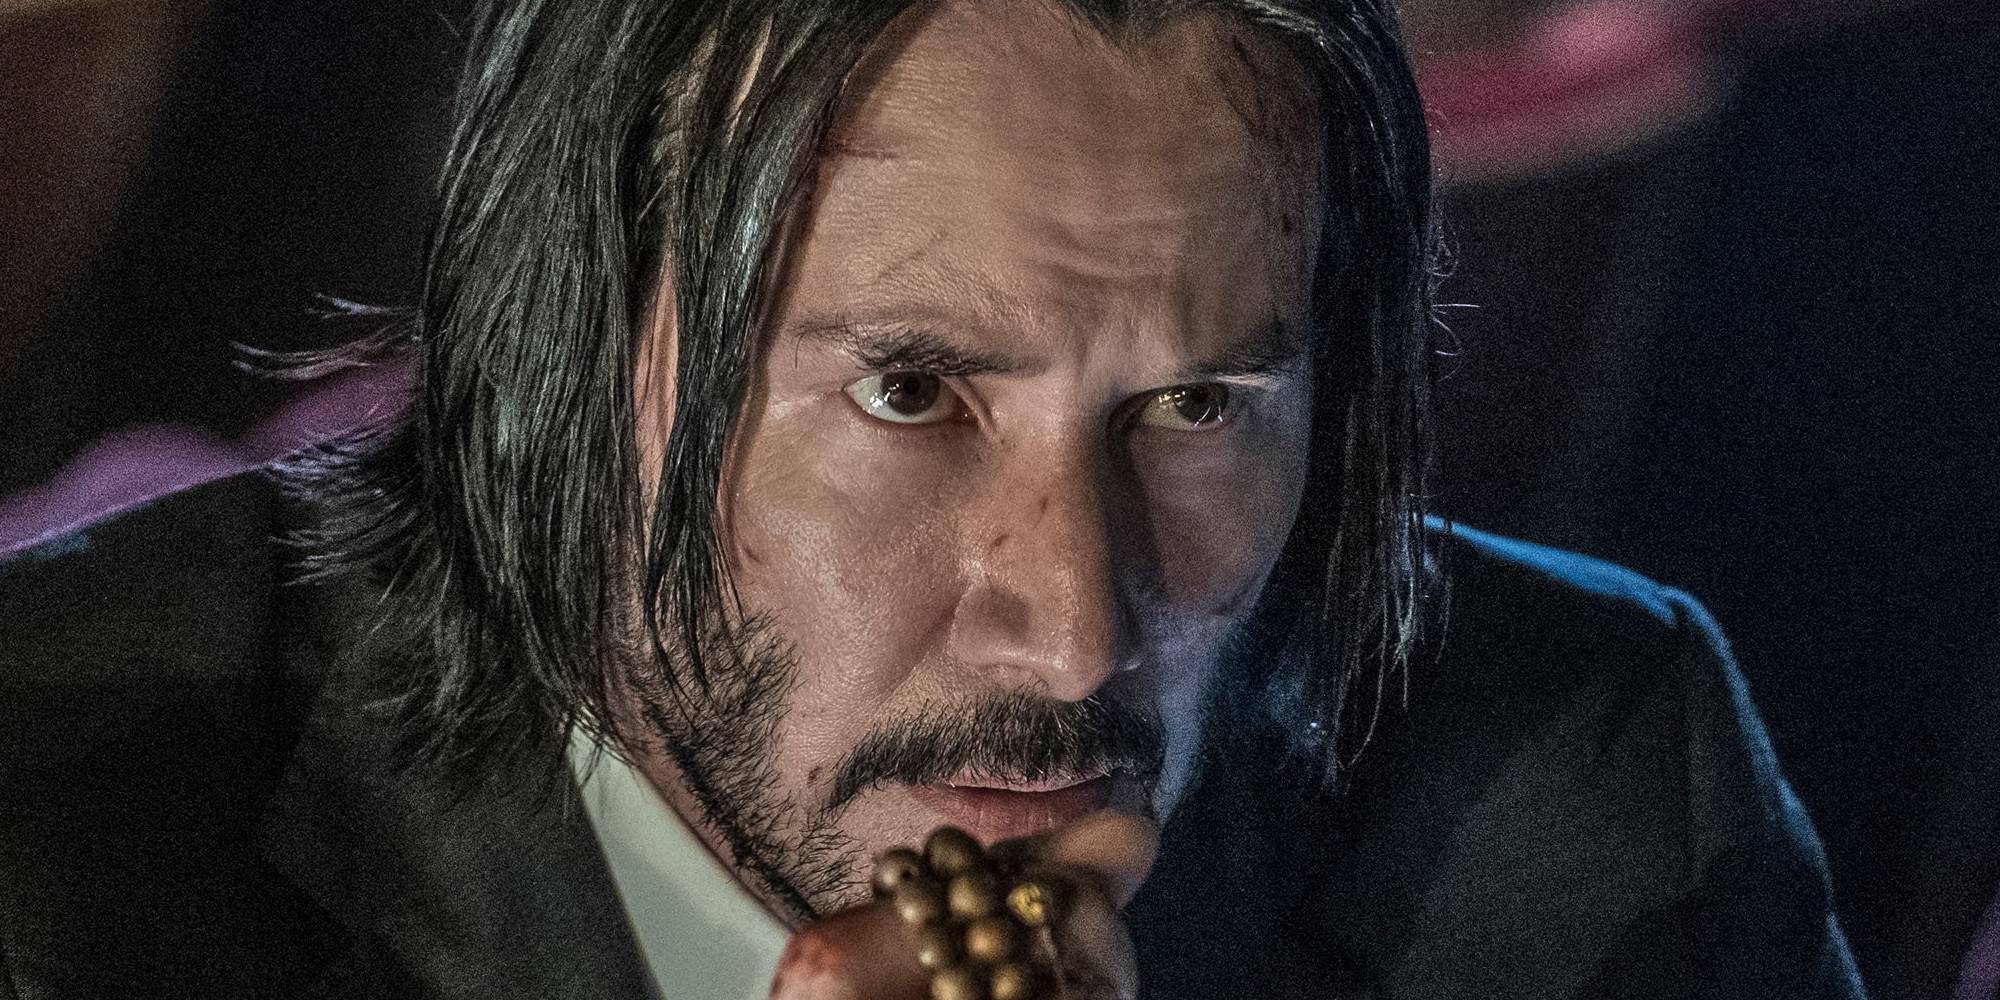 Featured image of post Keanu Reeves John Wick Beard : When john wick awakens to the russians in his home, the scene mirrors a similar incident that happened to keanu reeves in 2014 (the same year the movie was released), where reeves awoke to a stalker that had broken into his home.